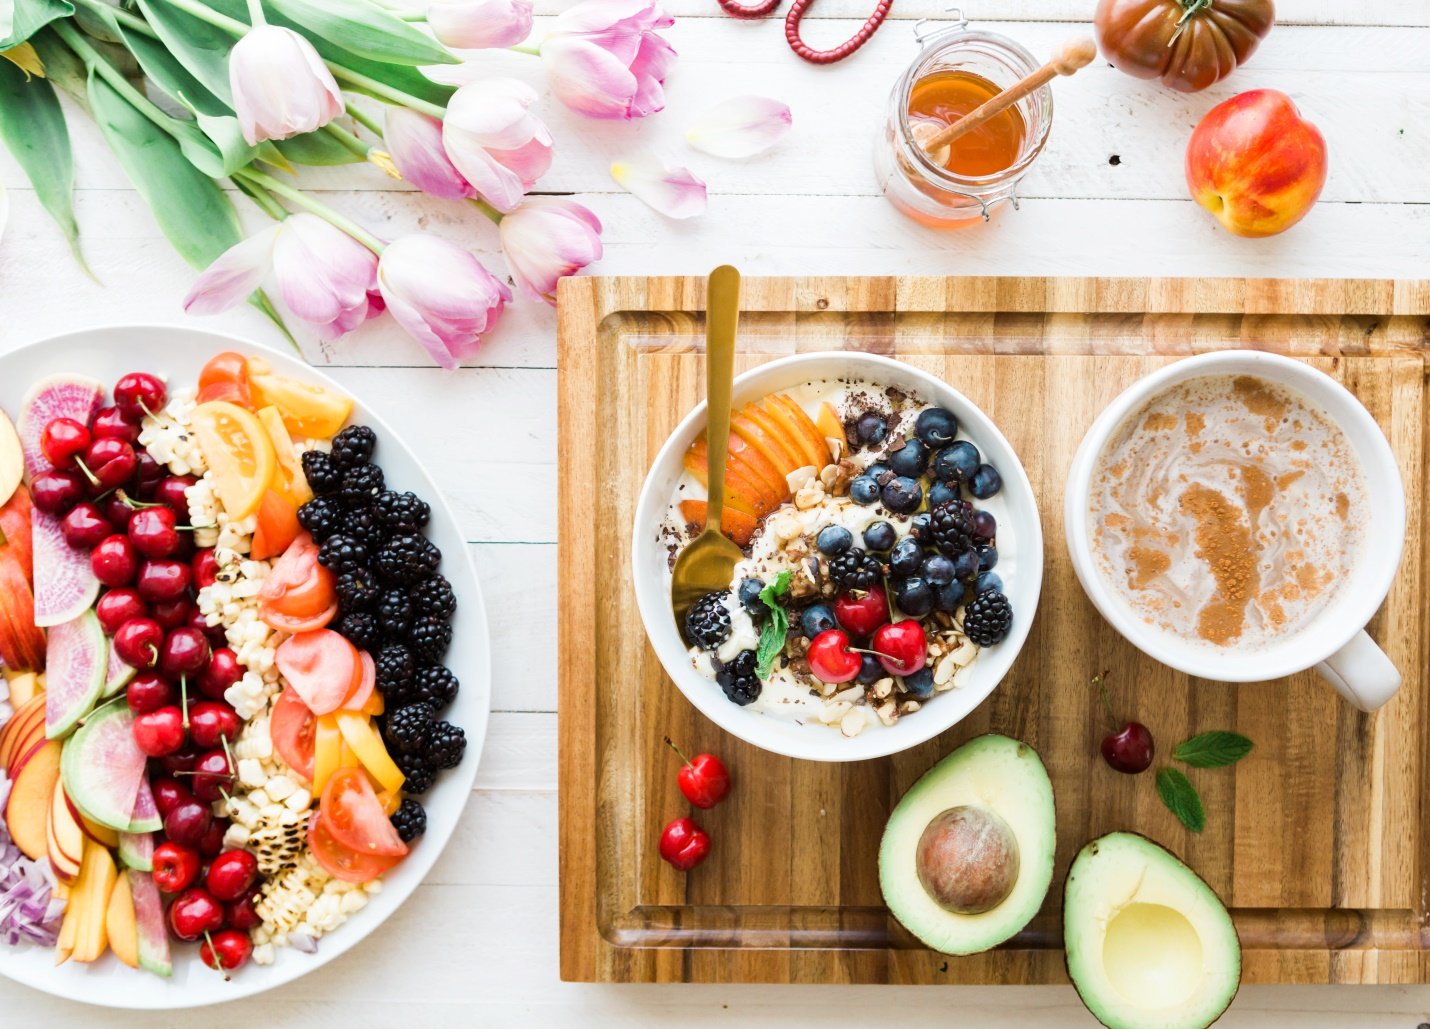 There are many options to have the healthiest breakfast. Read on!